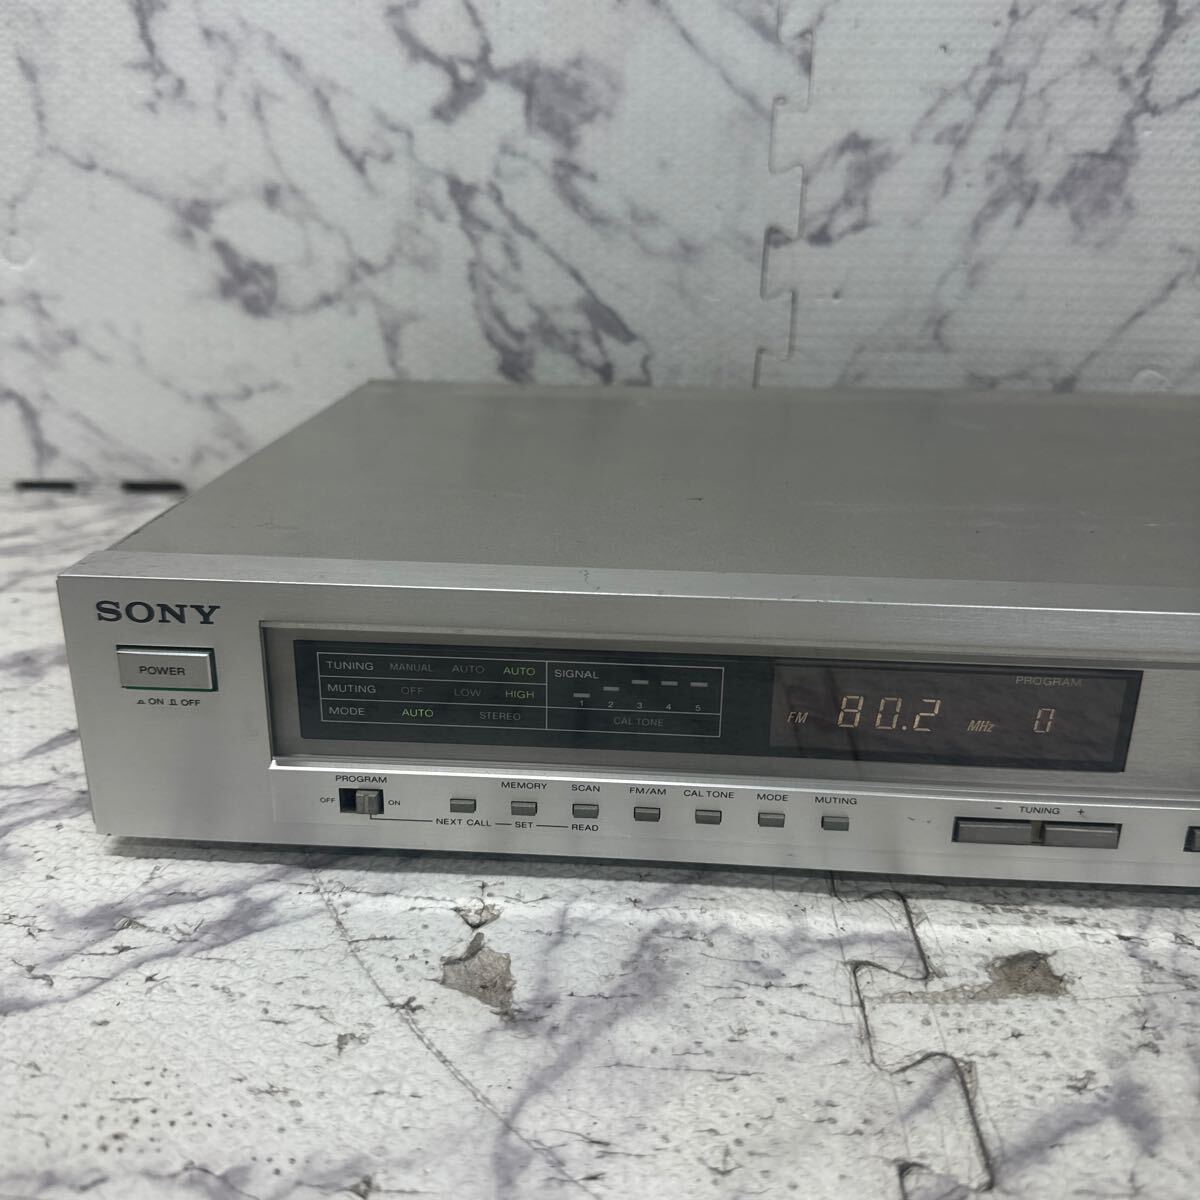 MYM5-130 super-discount SONY FM STEREO/FM-AM TUNER ST-J75 tuner electrification OK used present condition goods *3 times re-exhibition . liquidation 